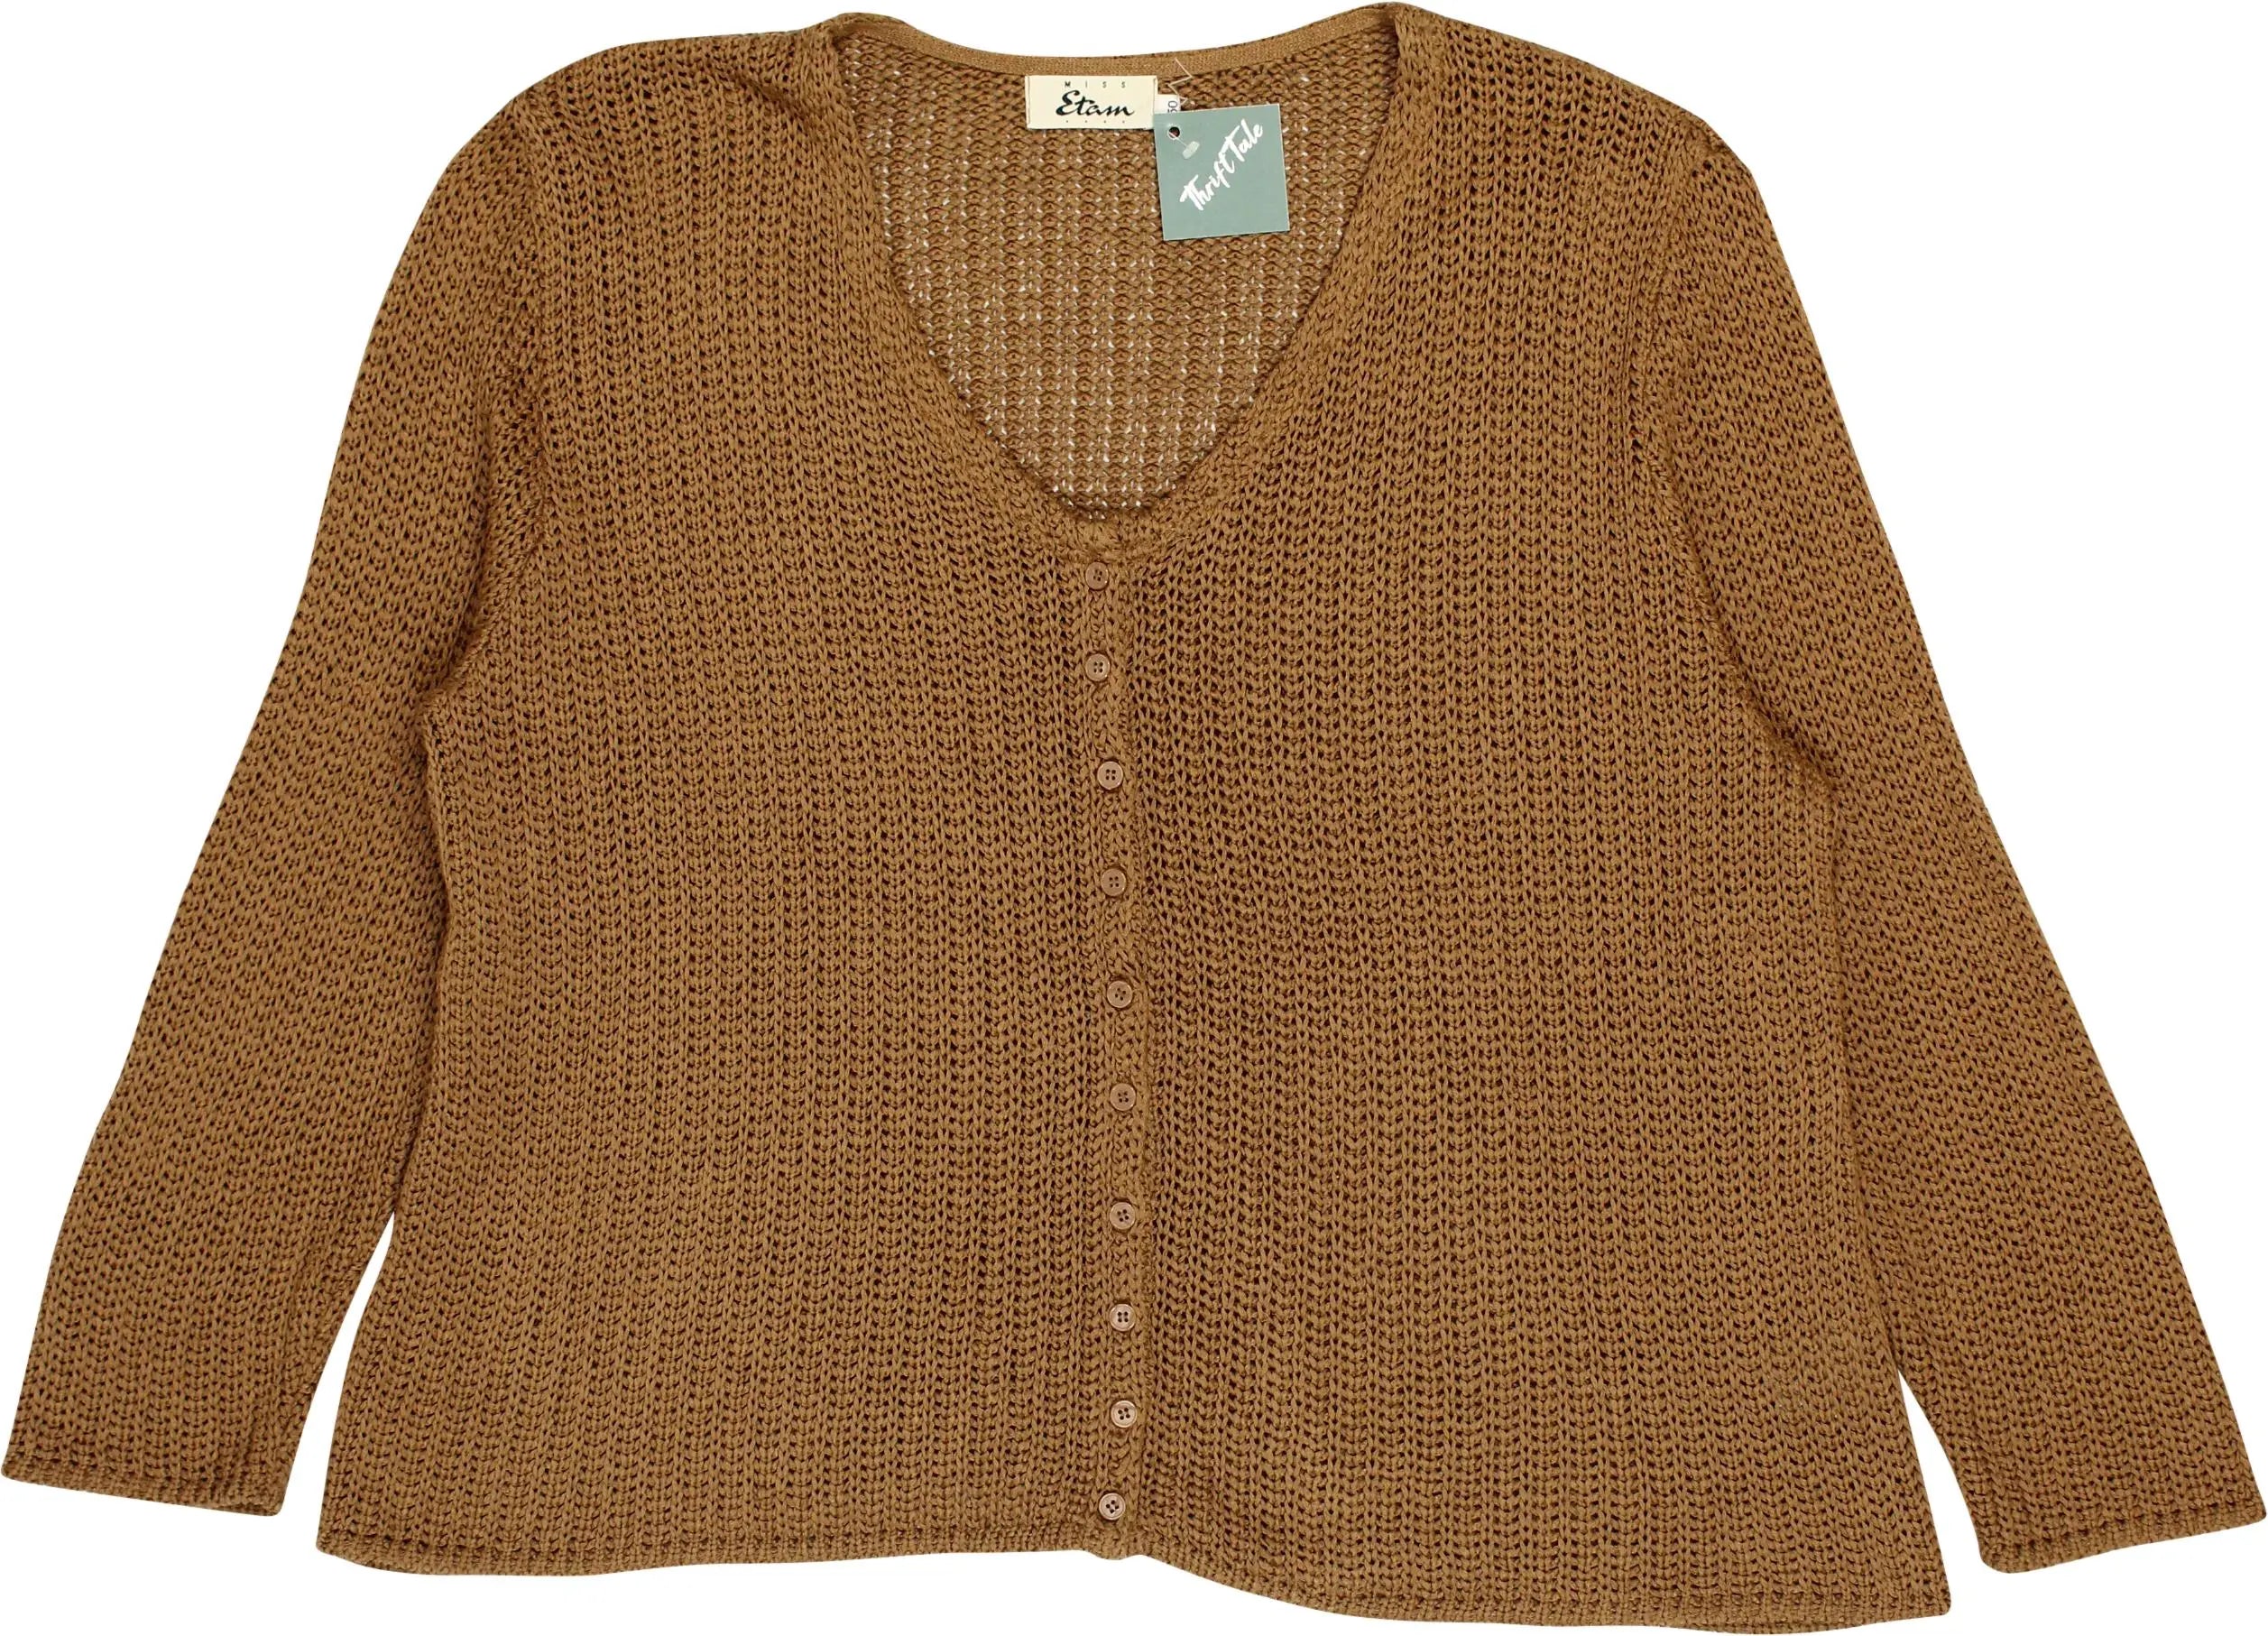 Miss Etam - Brown Knitted Cardigan- ThriftTale.com - Vintage and second handclothing